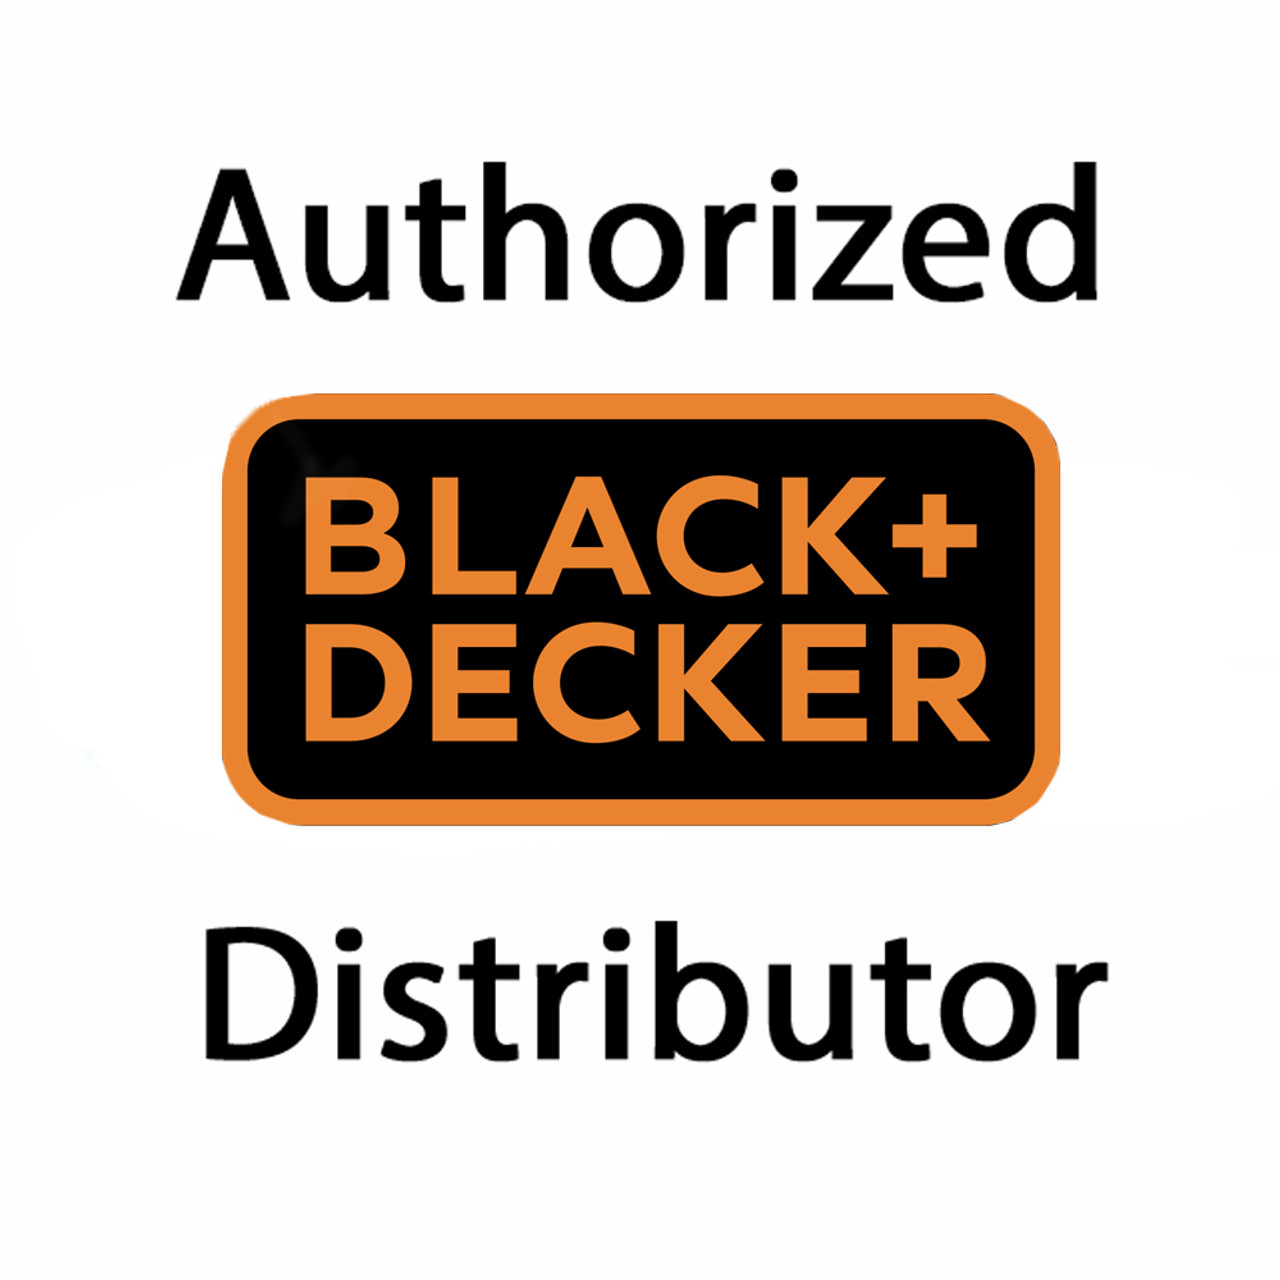 https://cdn11.bigcommerce.com/s-fo9uktl/images/stencil/1280x1280/products/80650/121804/Authorized%20Black%20and%20Decker%20Distributor__45056.1643751551.jpg?c=2